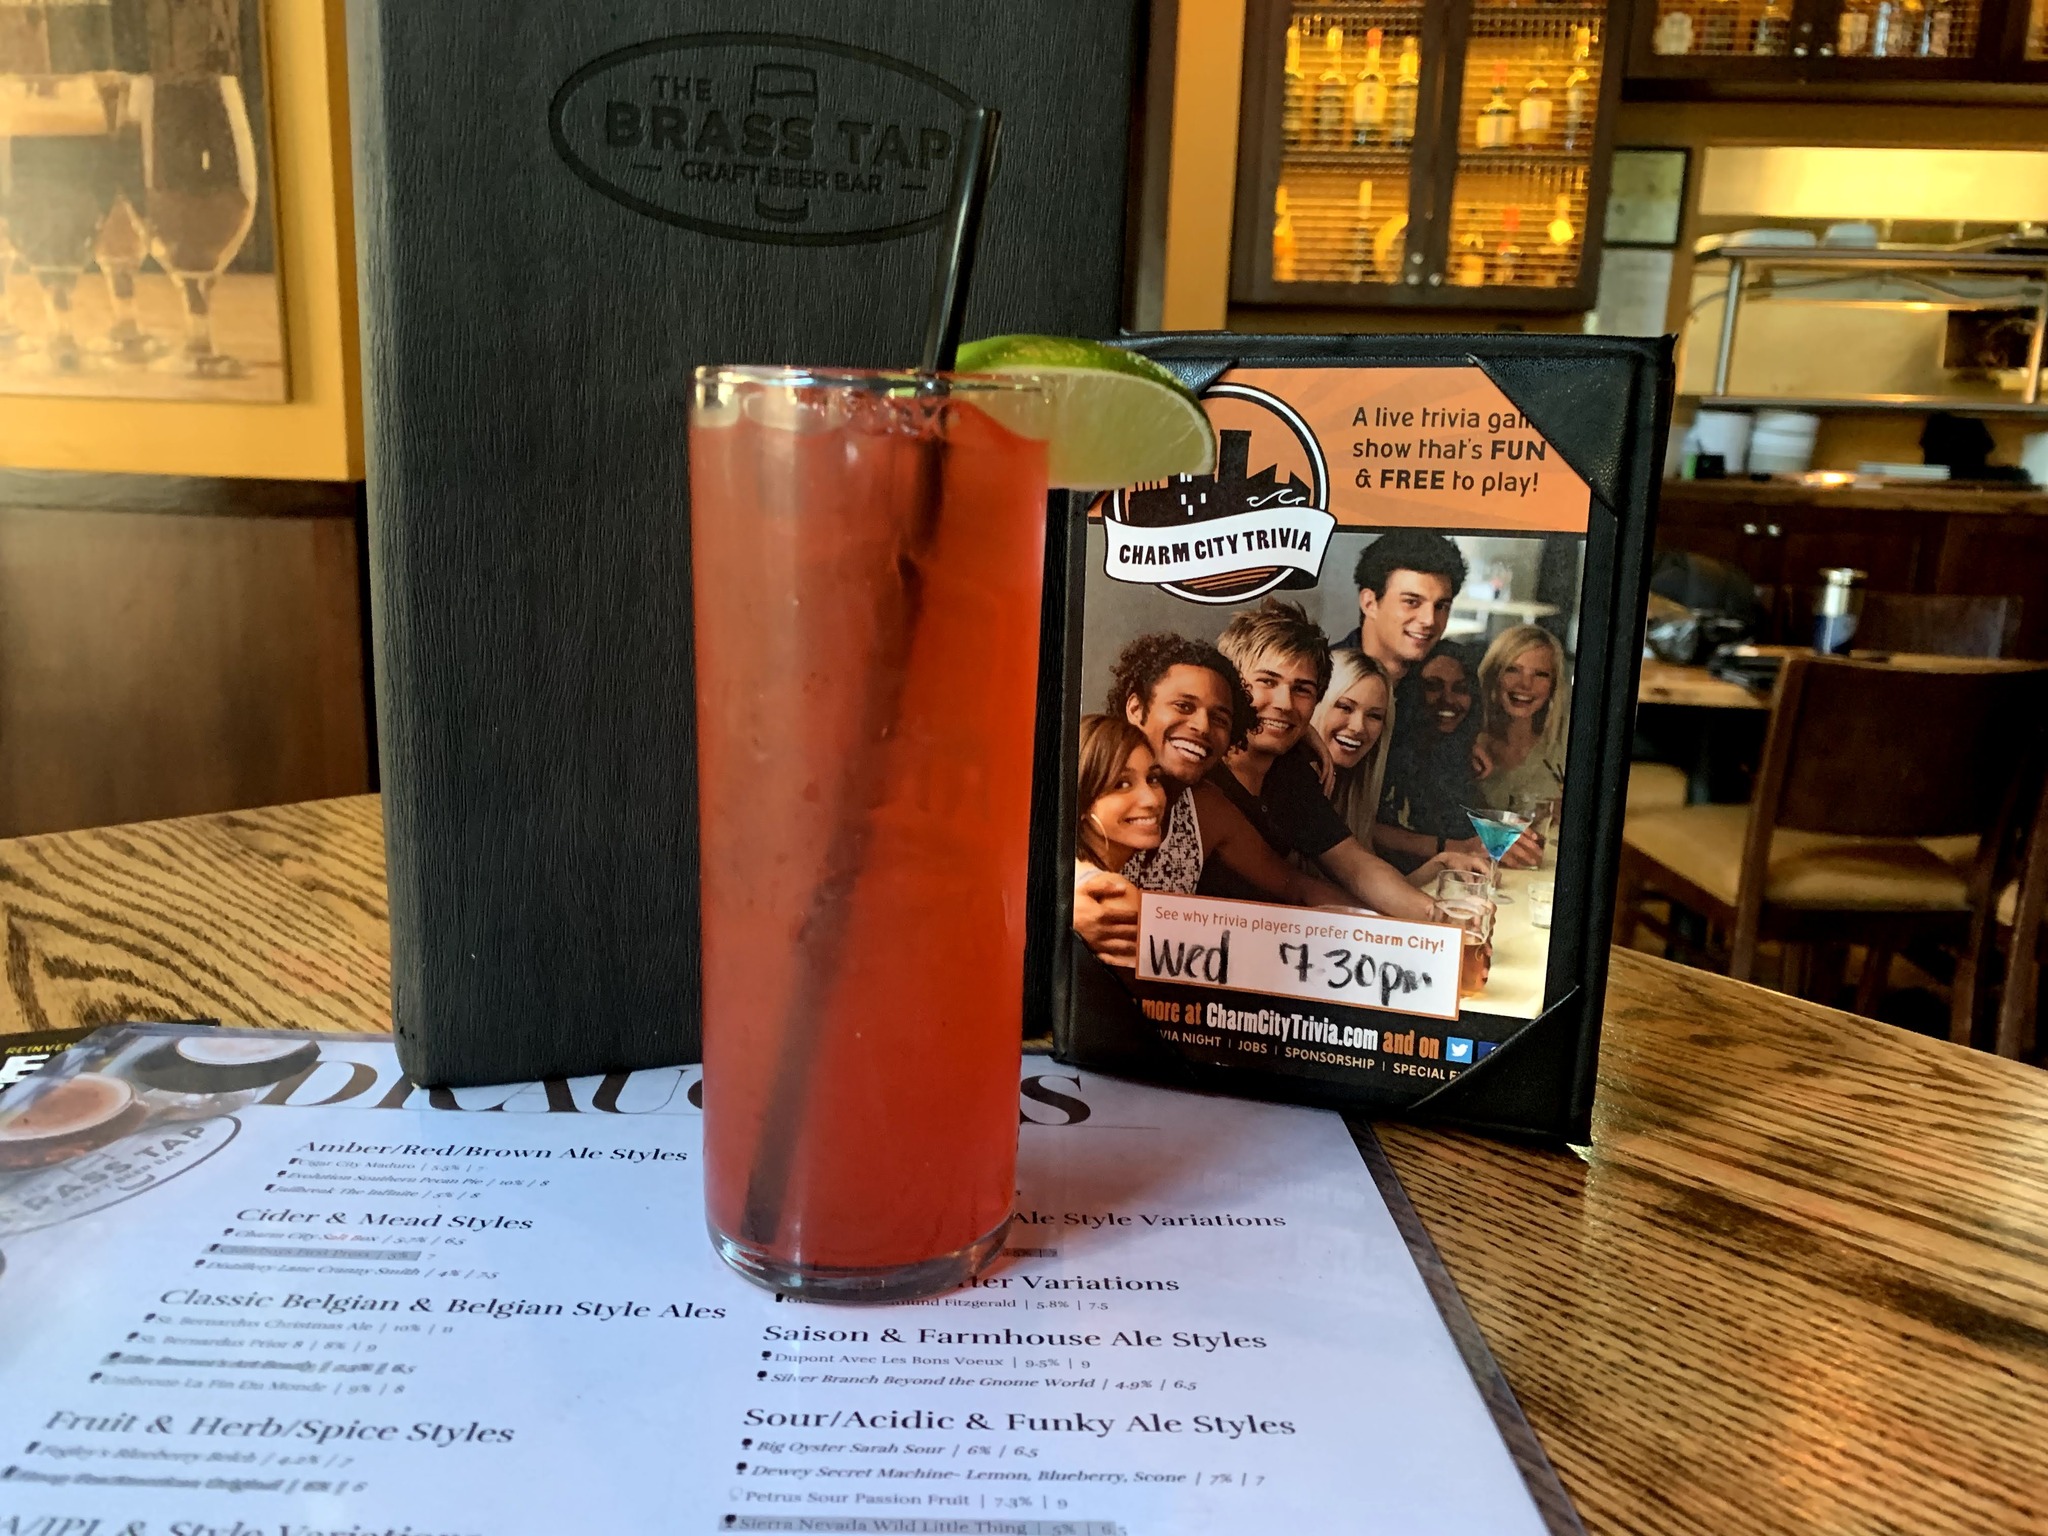 A red drink with a lime wedge sitting on a menu with a smaller menu displaying a Charm City Trivia advertisement